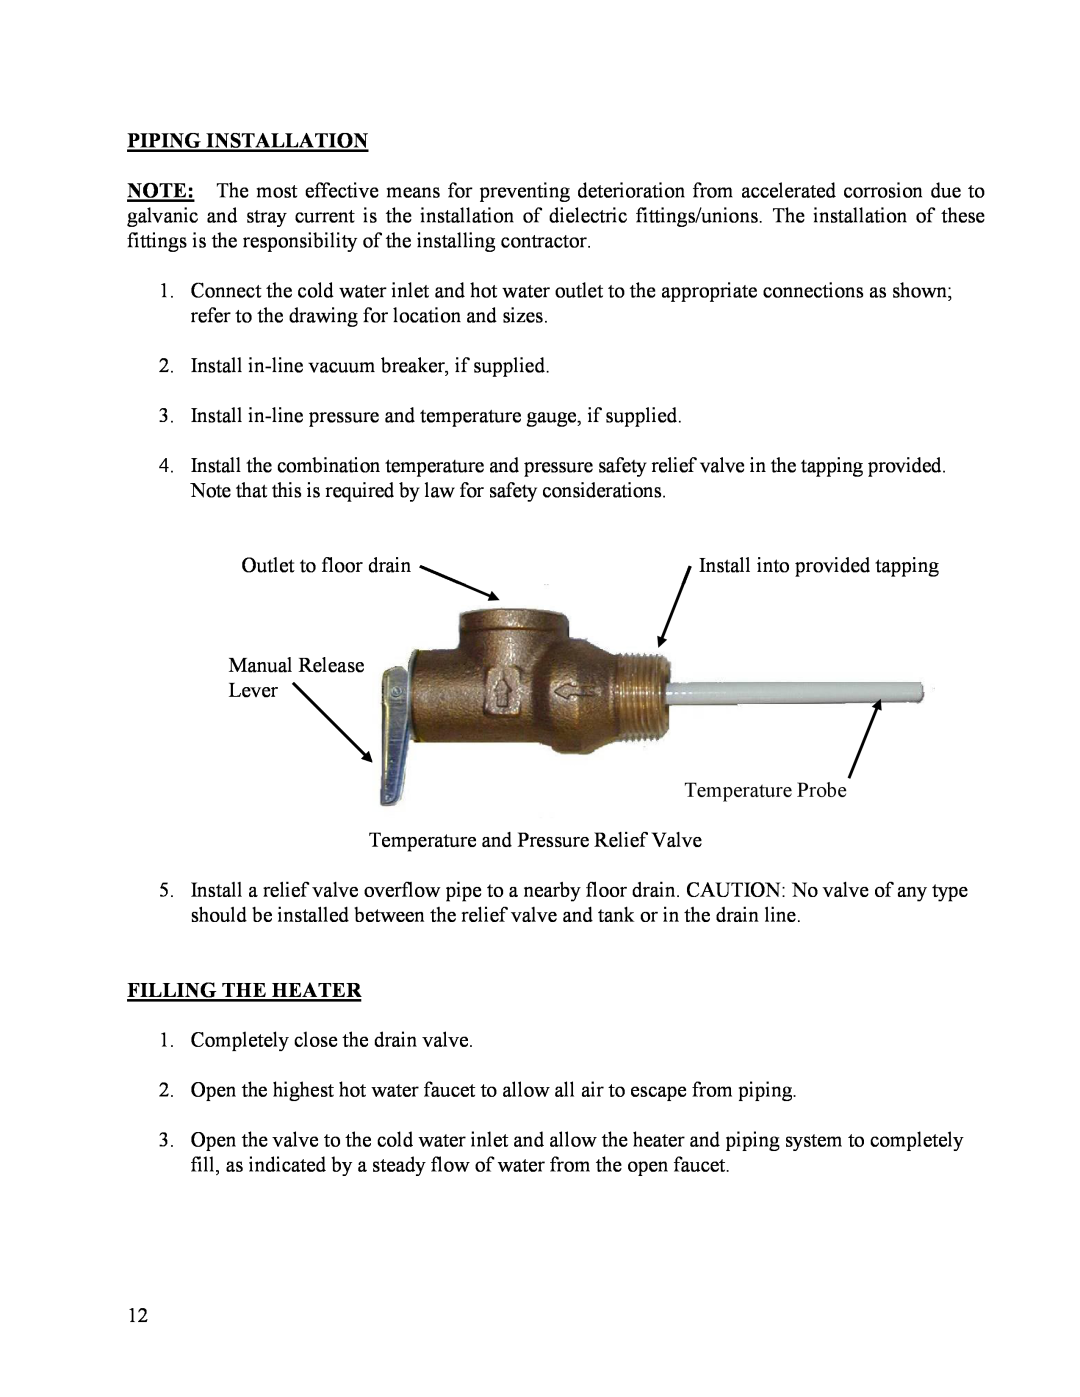 Hubbell Electric Heater Company MSE manual Piping Installation, Filling The Heater 